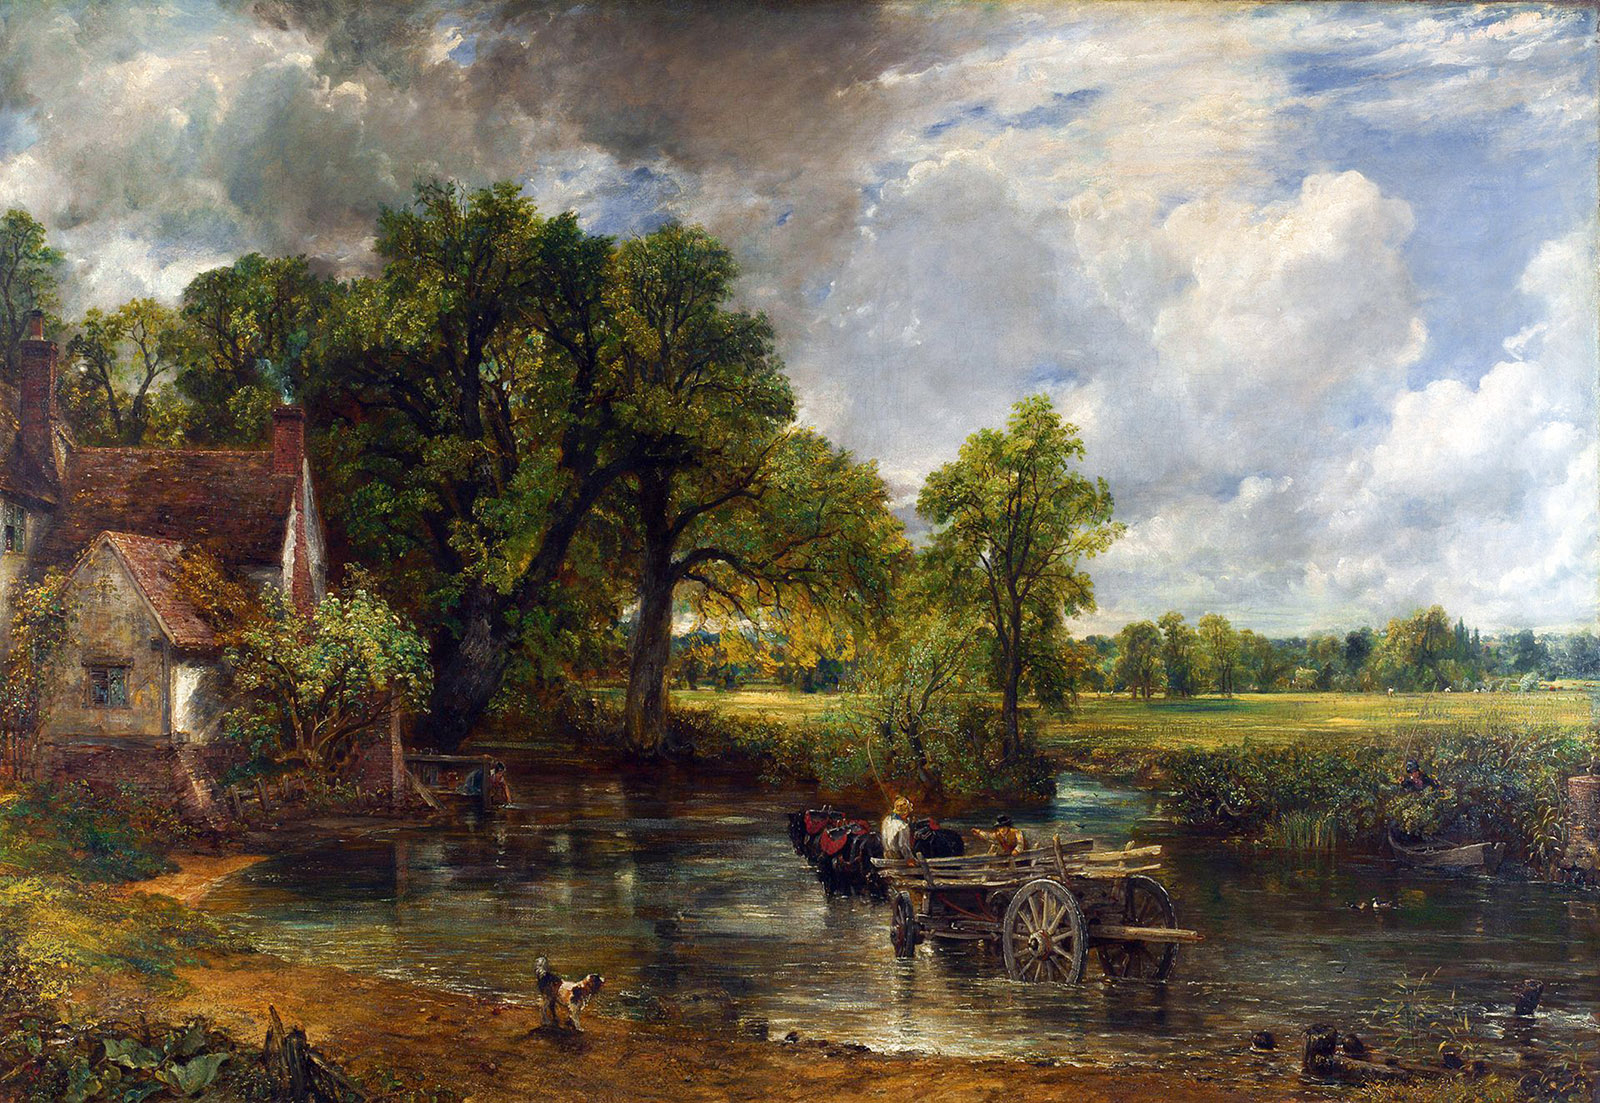 The Hay Wain; painting by John Constable